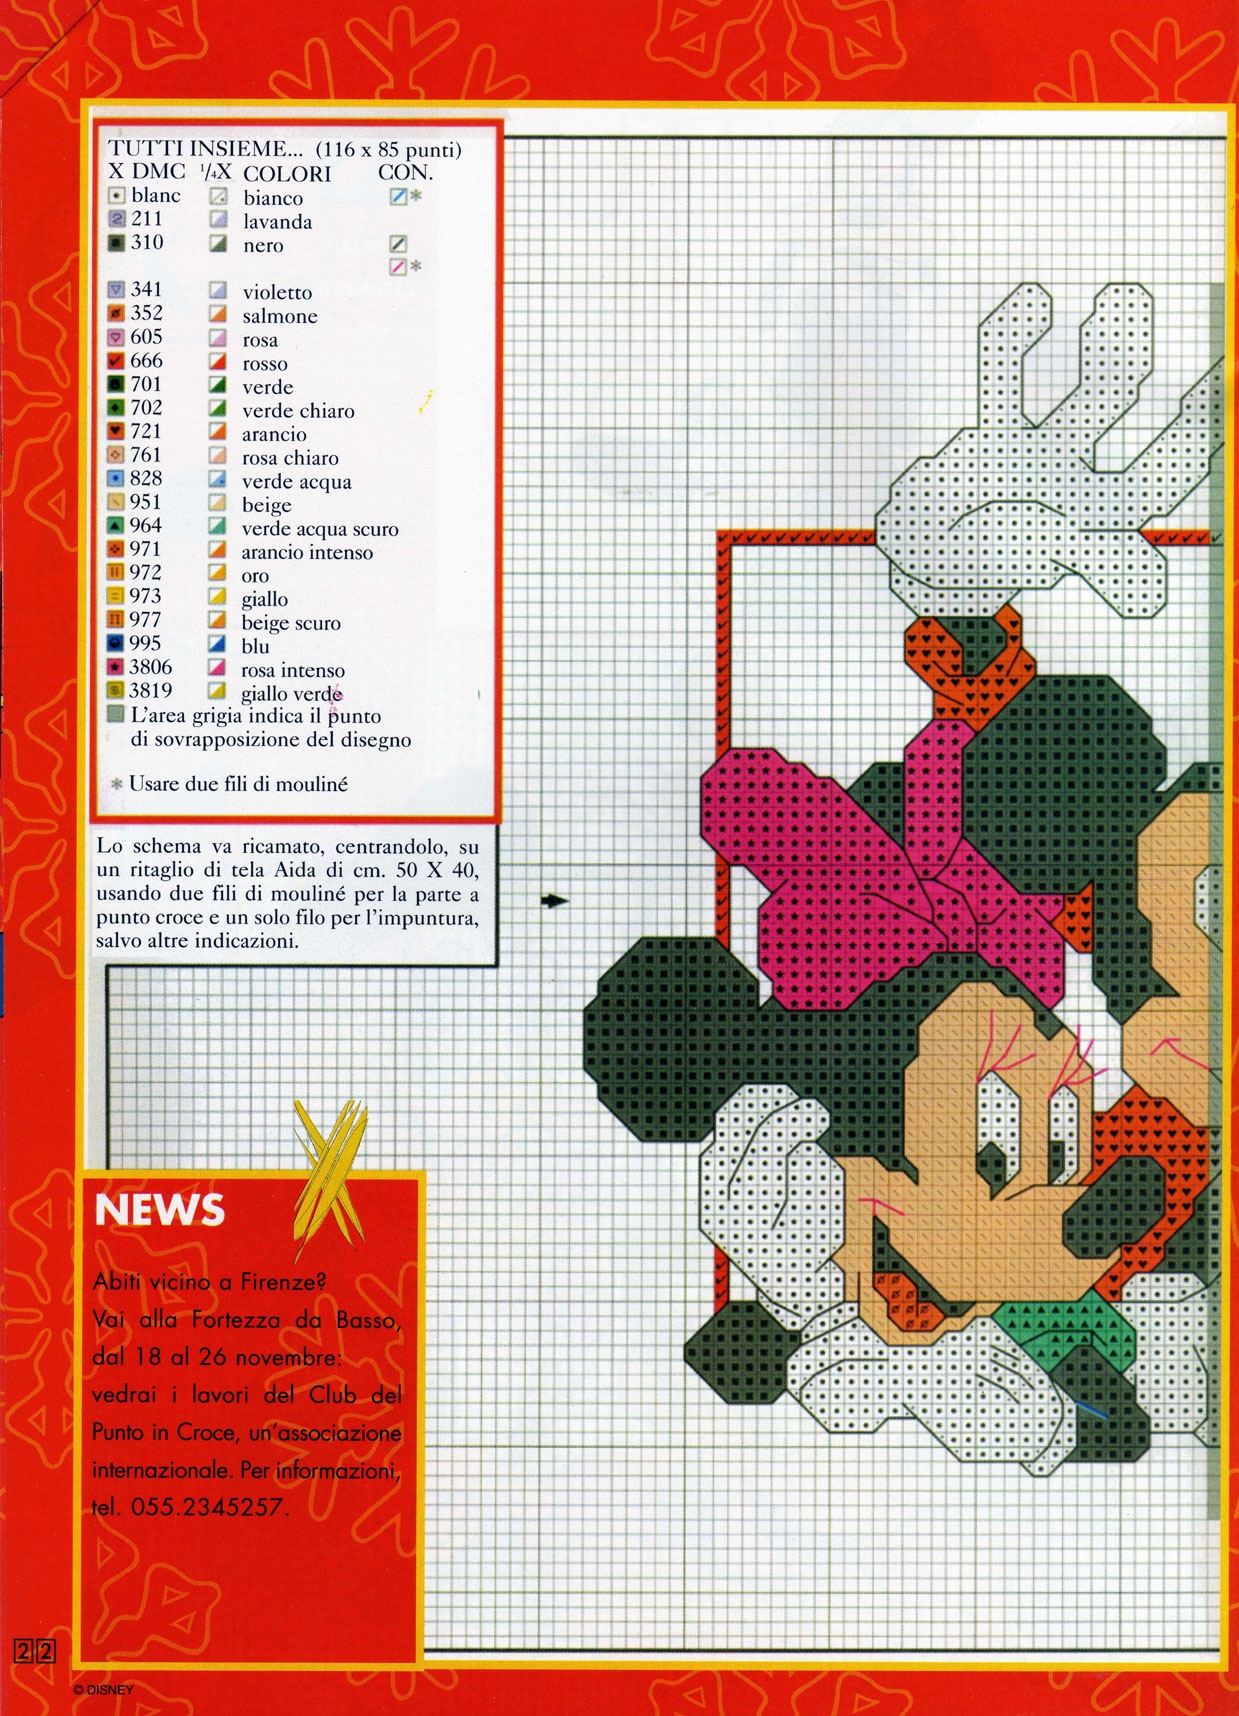 Cross stitch pattern with Disney characters (1)